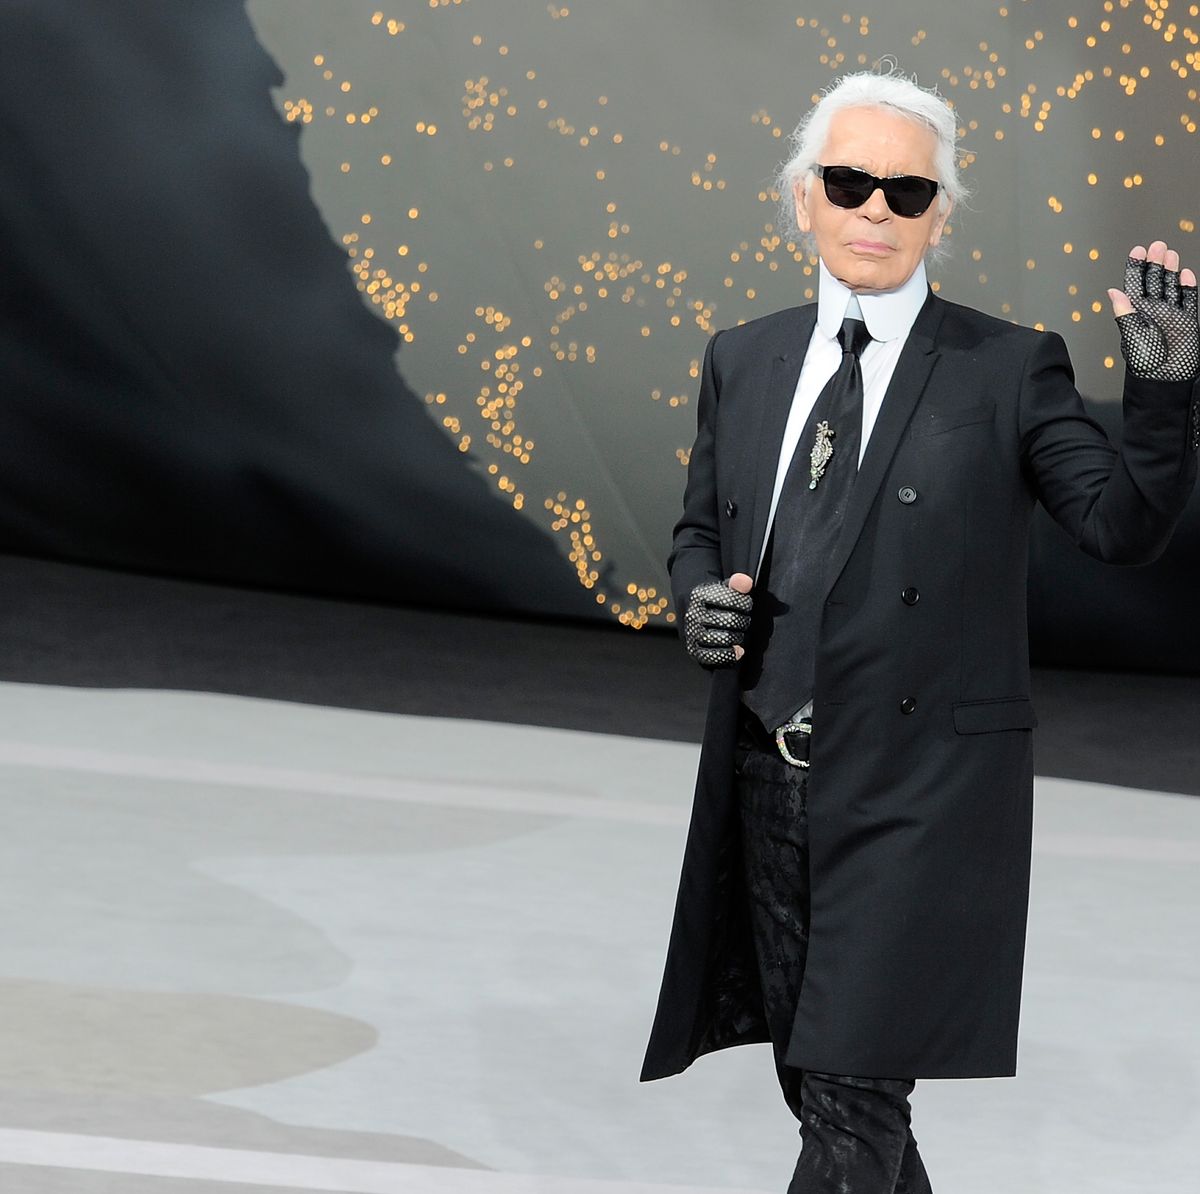 Karl Lagerfeld Best Quotes - 9 Quotes from Karl Lagerfeld, Iconic